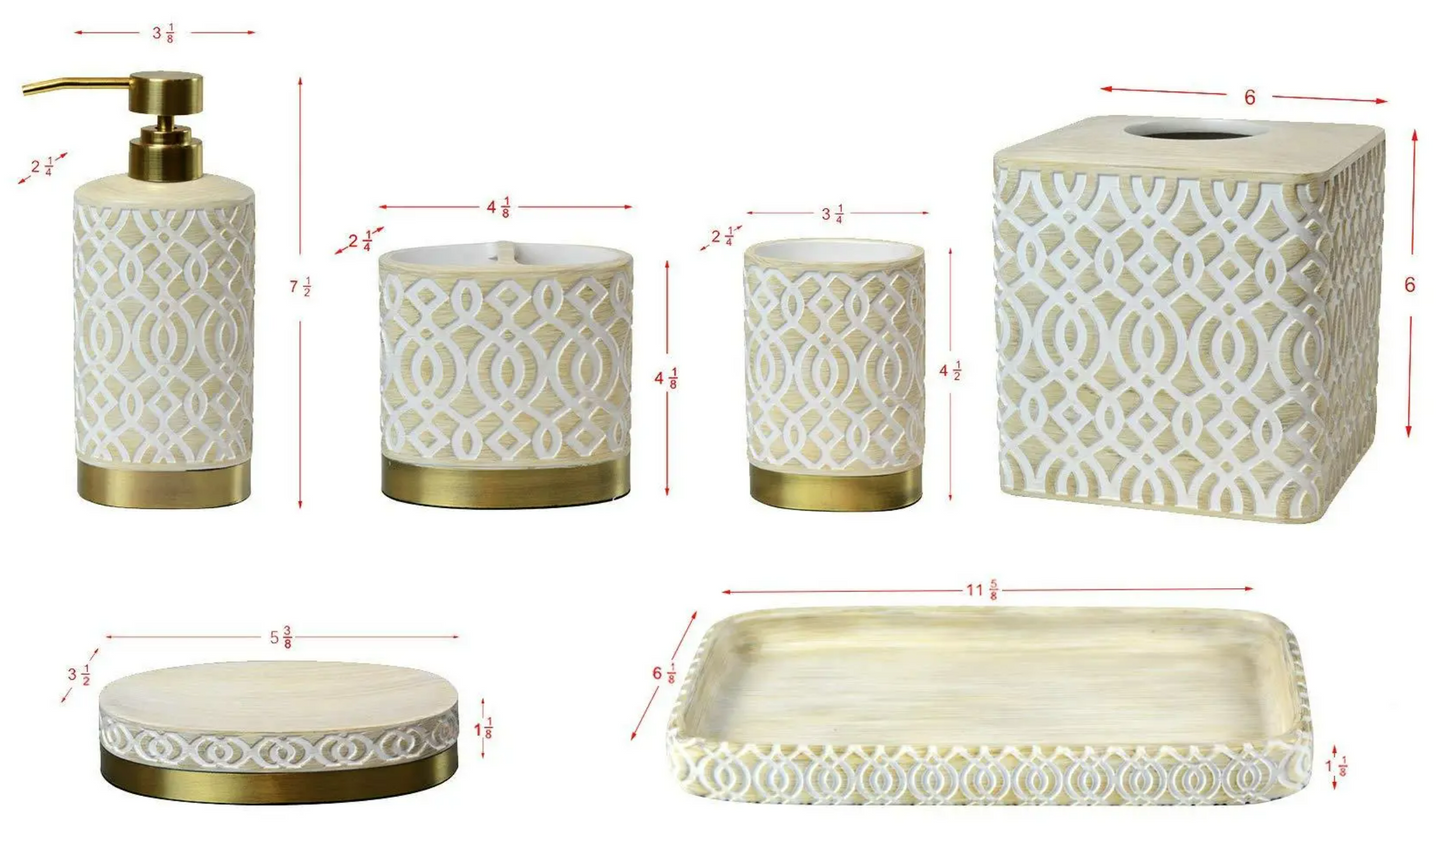 6 Piece Gold White Poly Resin Bathroom Accessory Set - #EH-0411